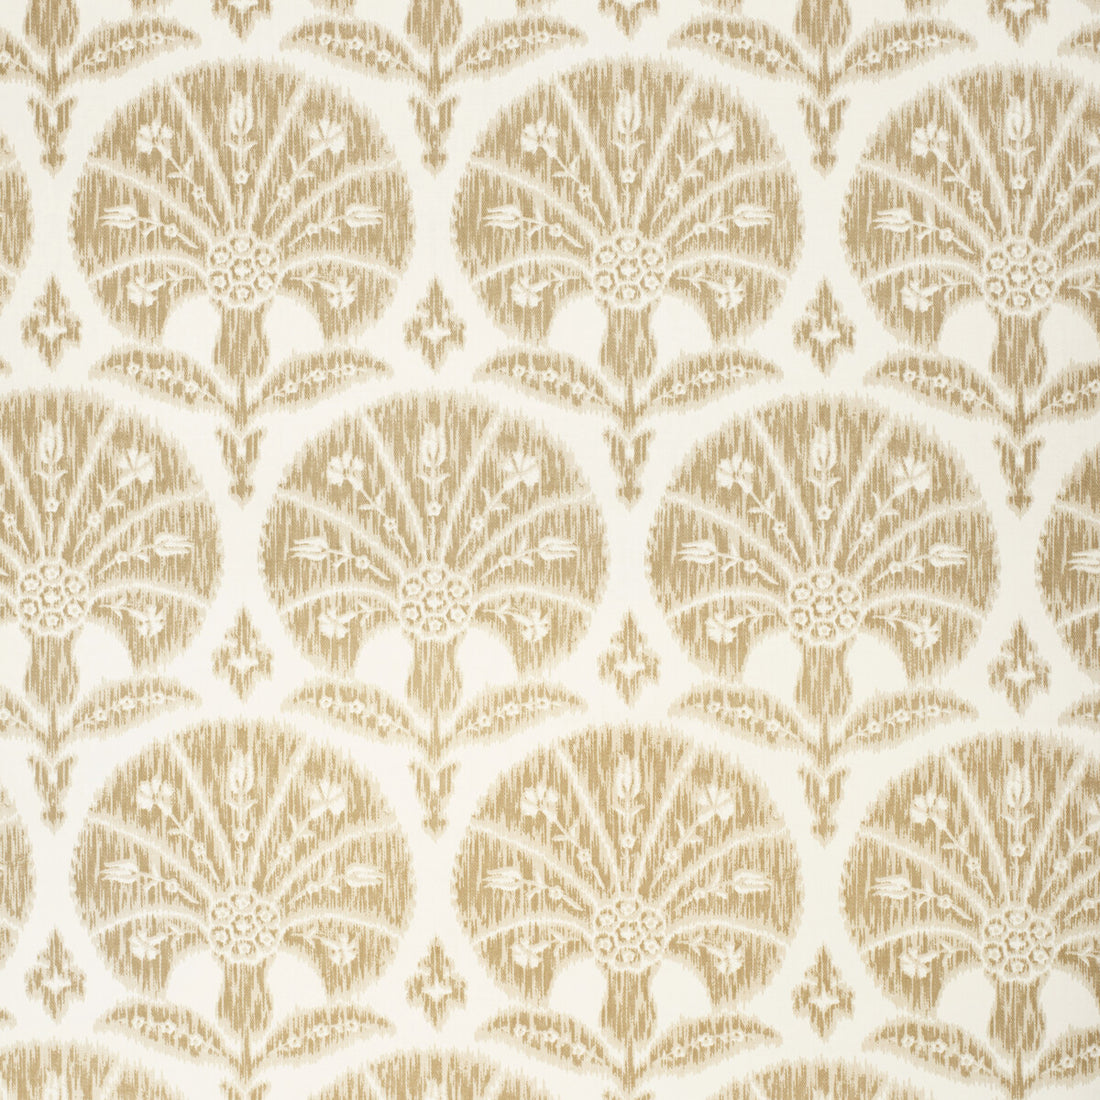 Opium Cotton fabric in beige color - pattern 2020153.161.0 - by Lee Jofa in the Paolo Moschino Fabrics collection